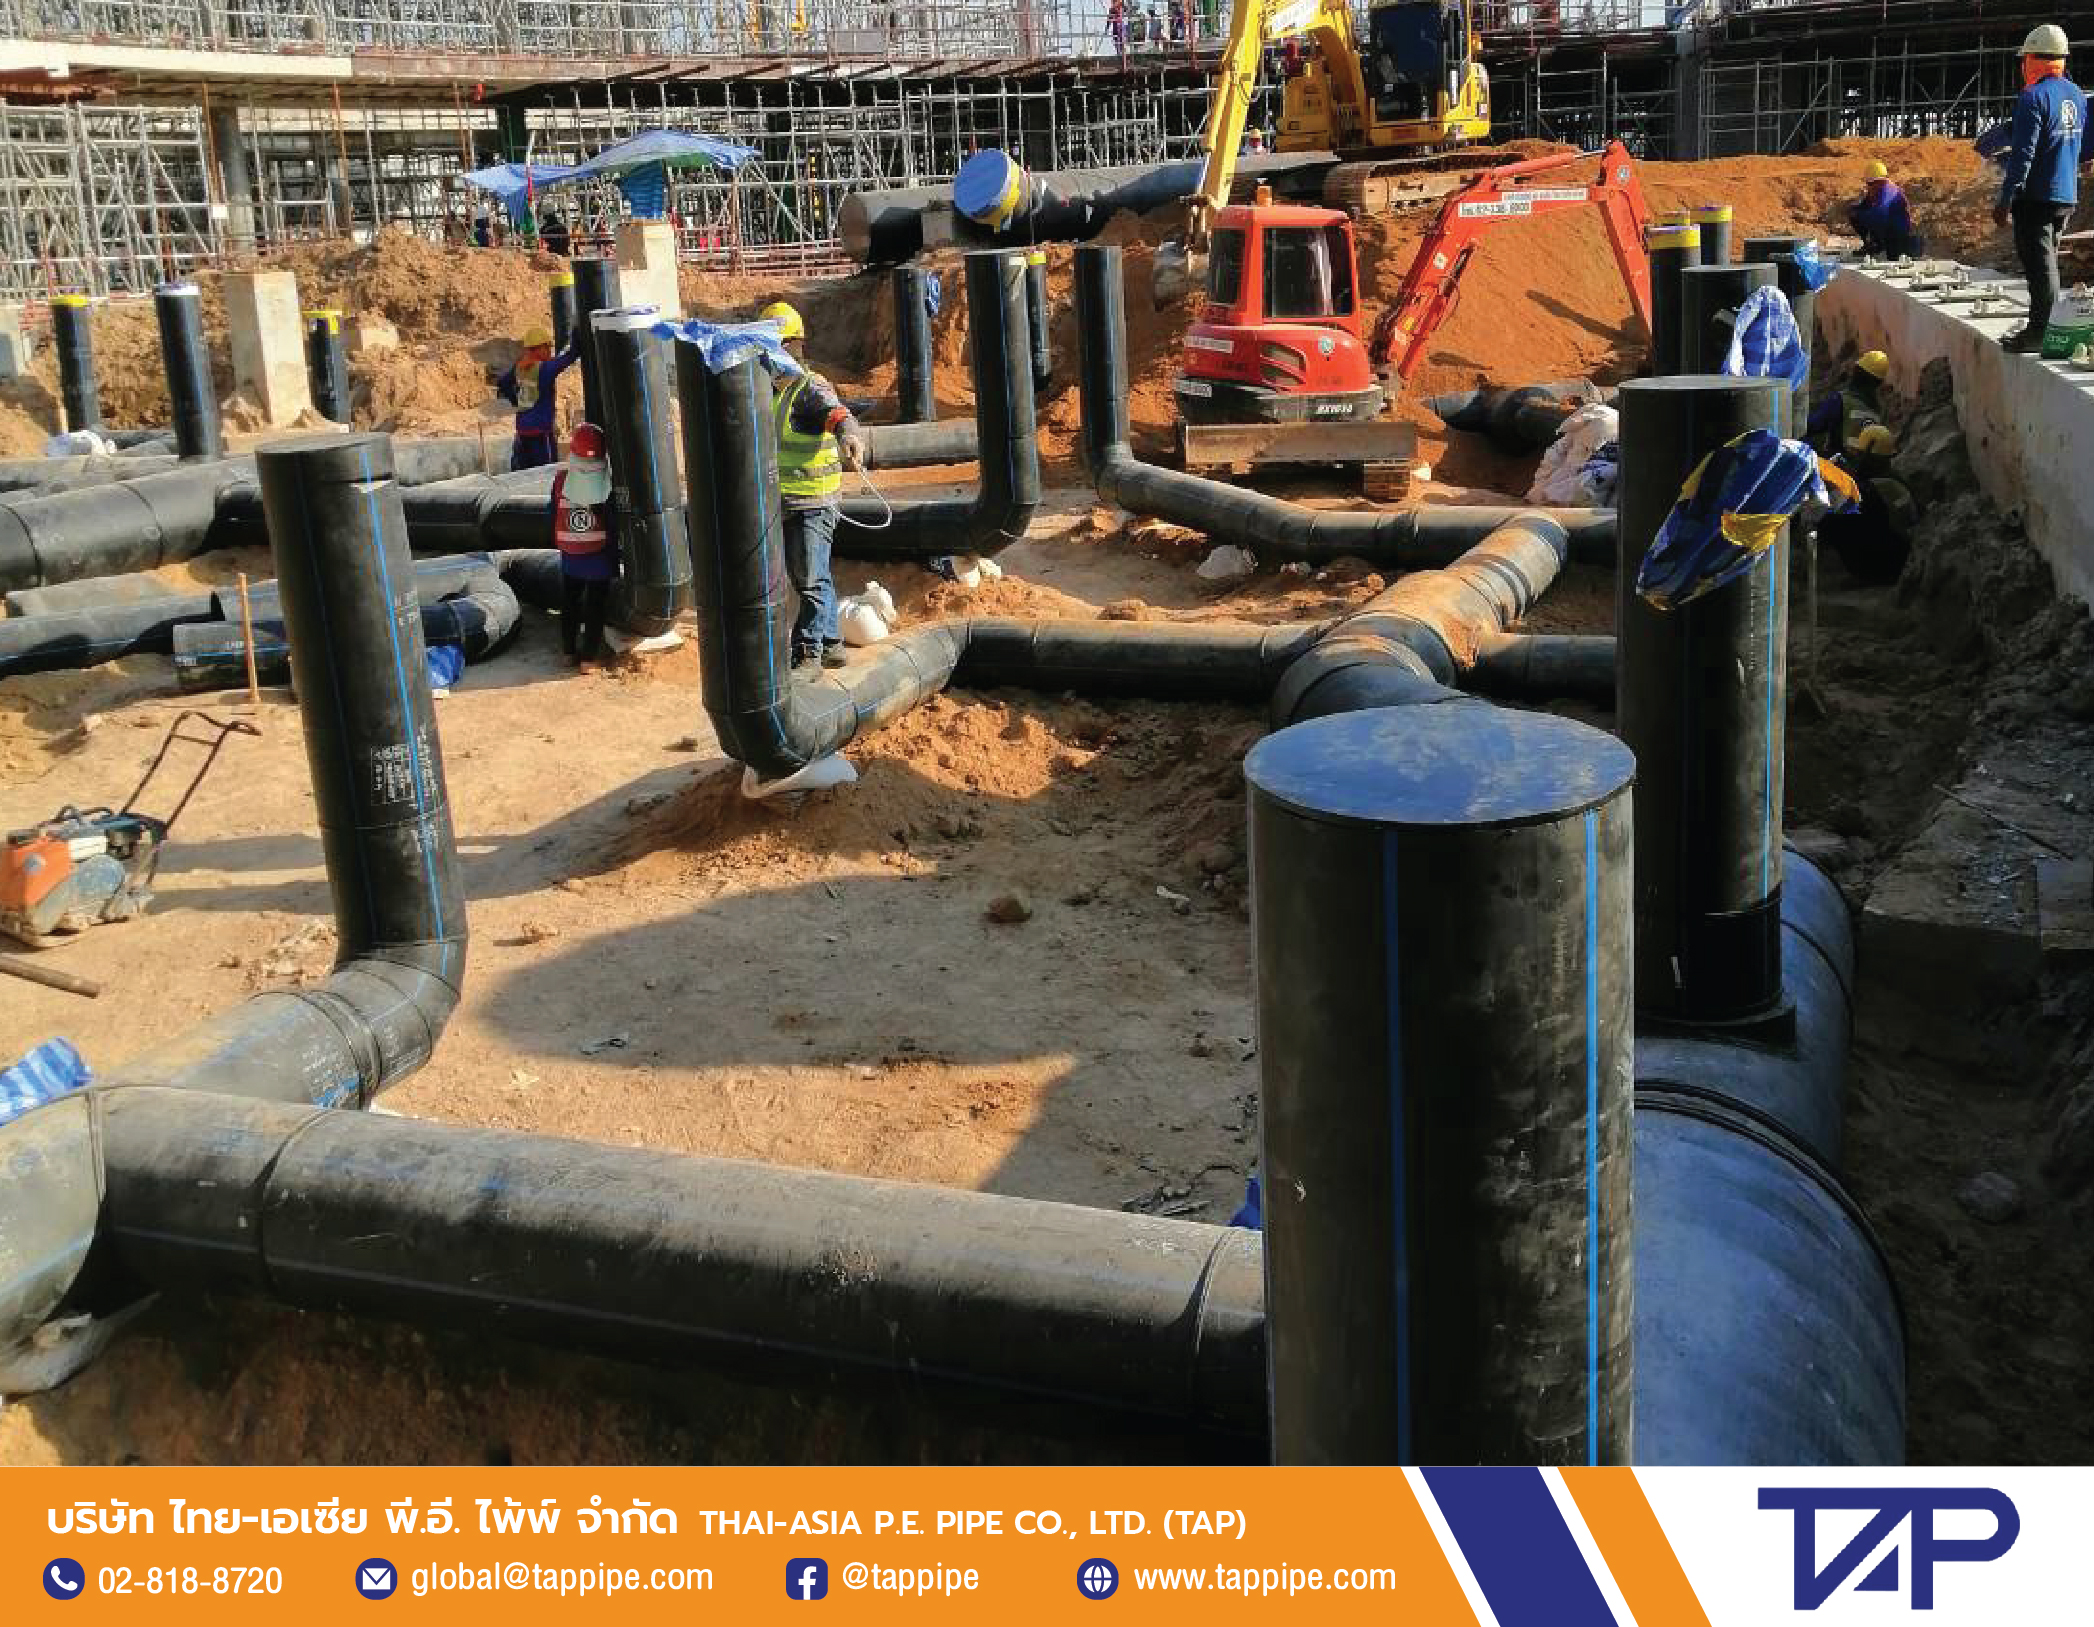 An HDPE pipe system has been installed for the OEM HDPE project